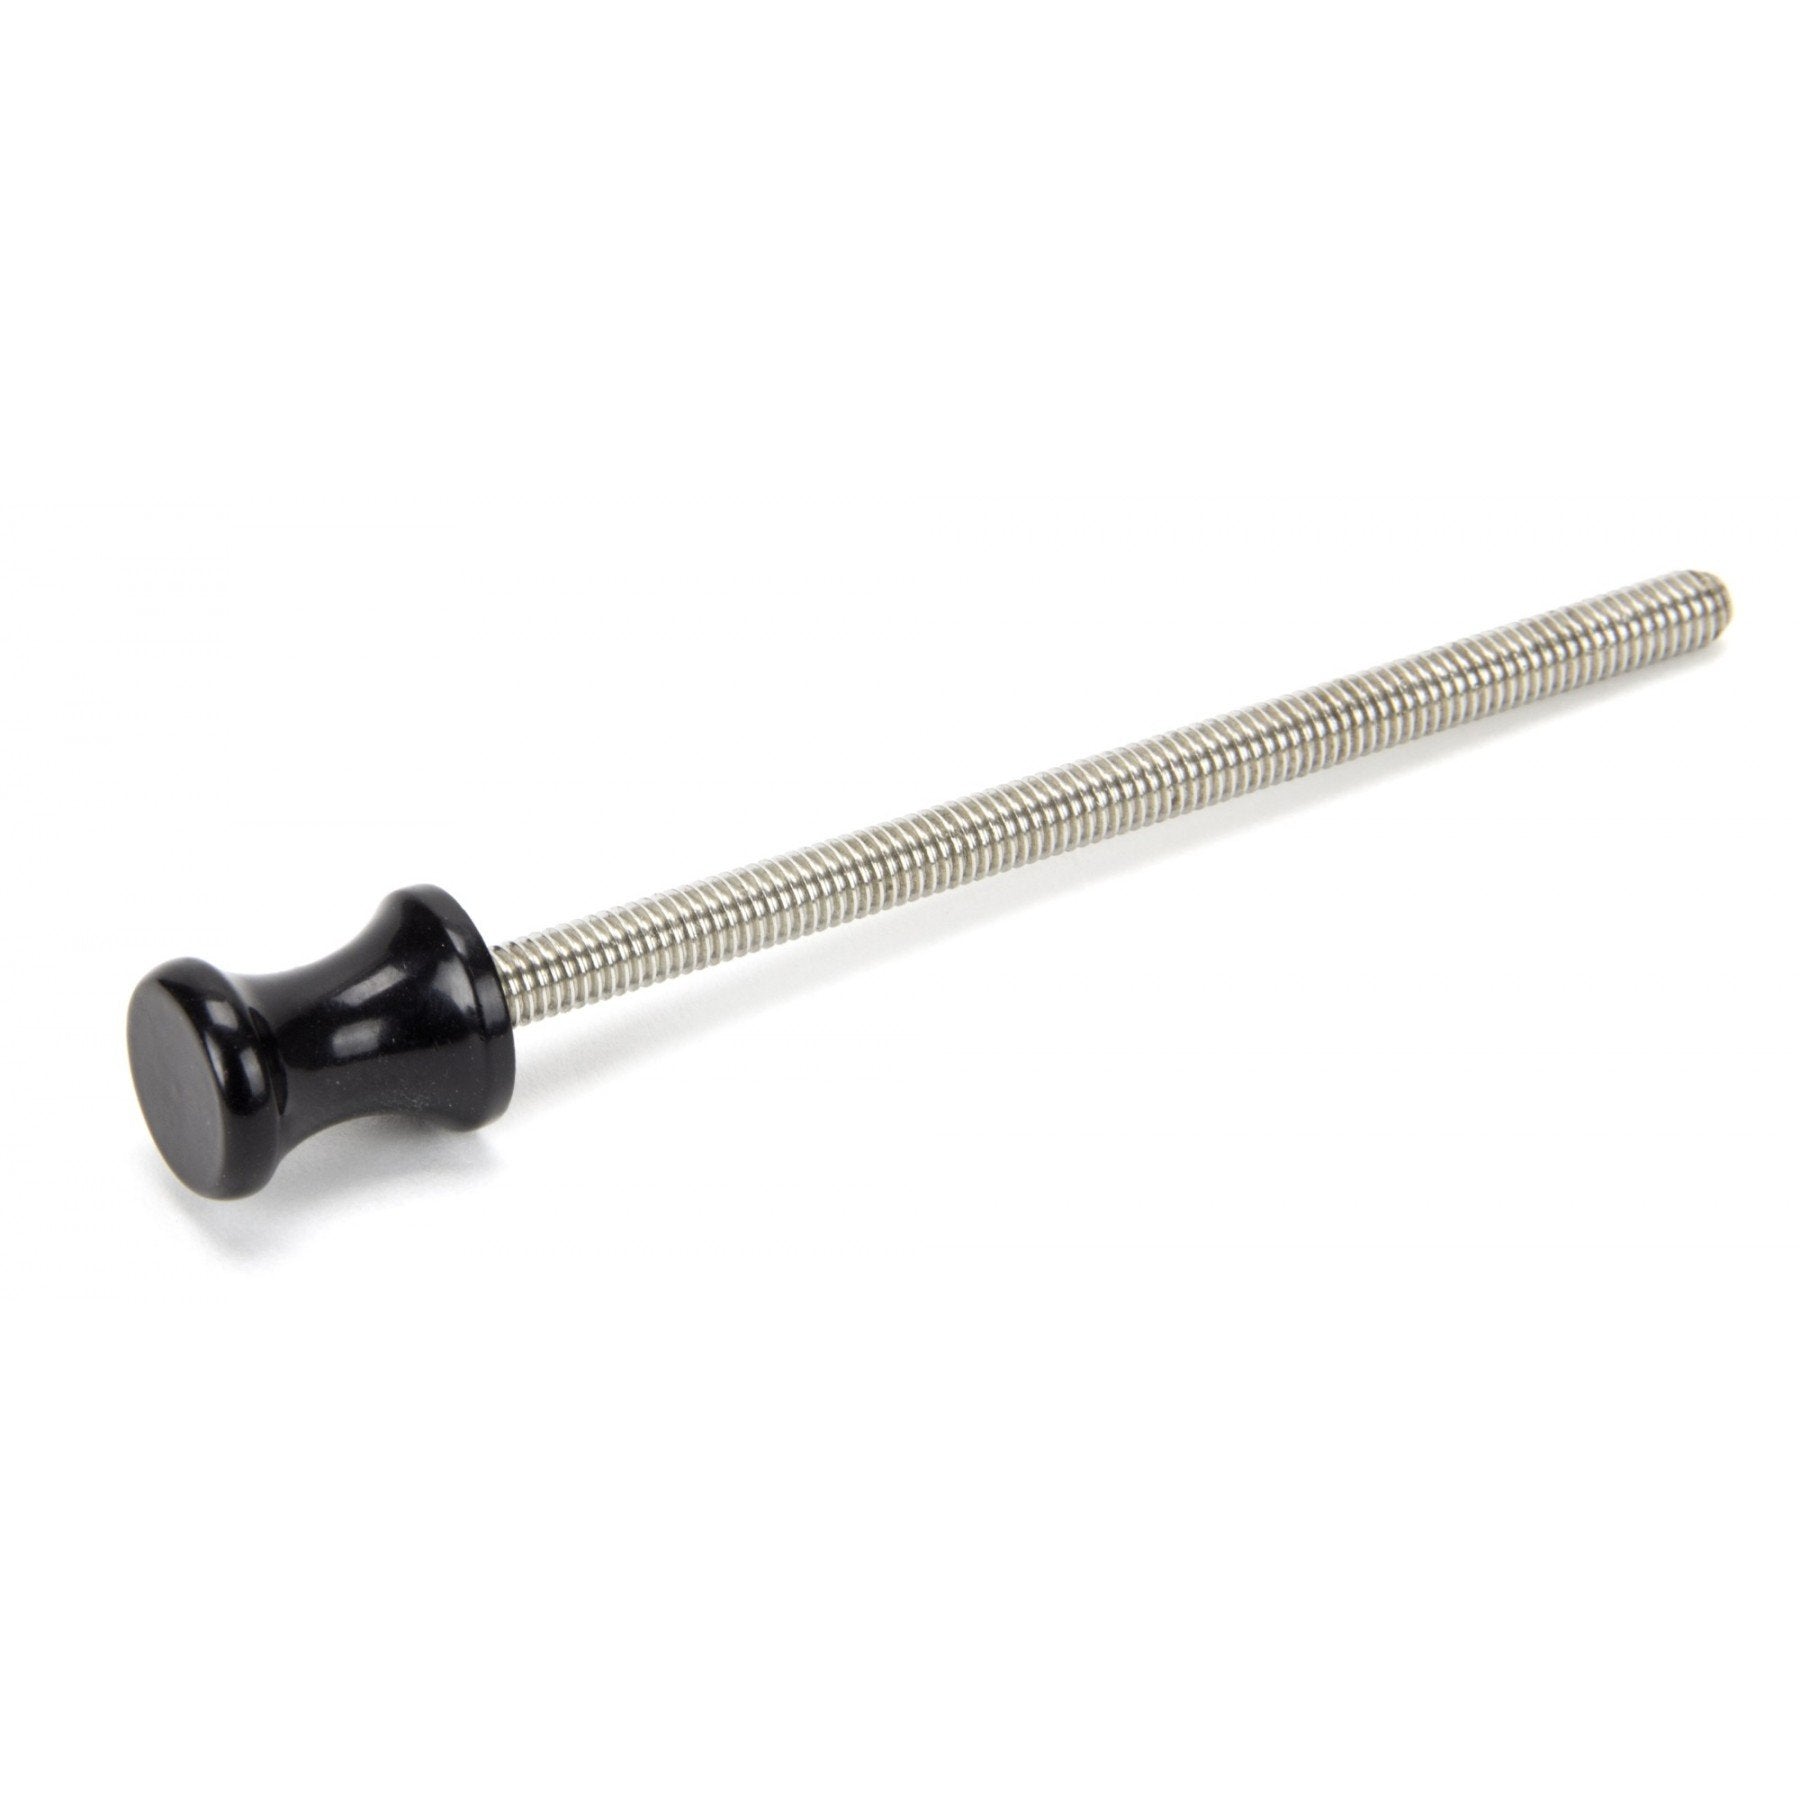 From the Anvil Black ended SS M6 110mm Threaded Bar